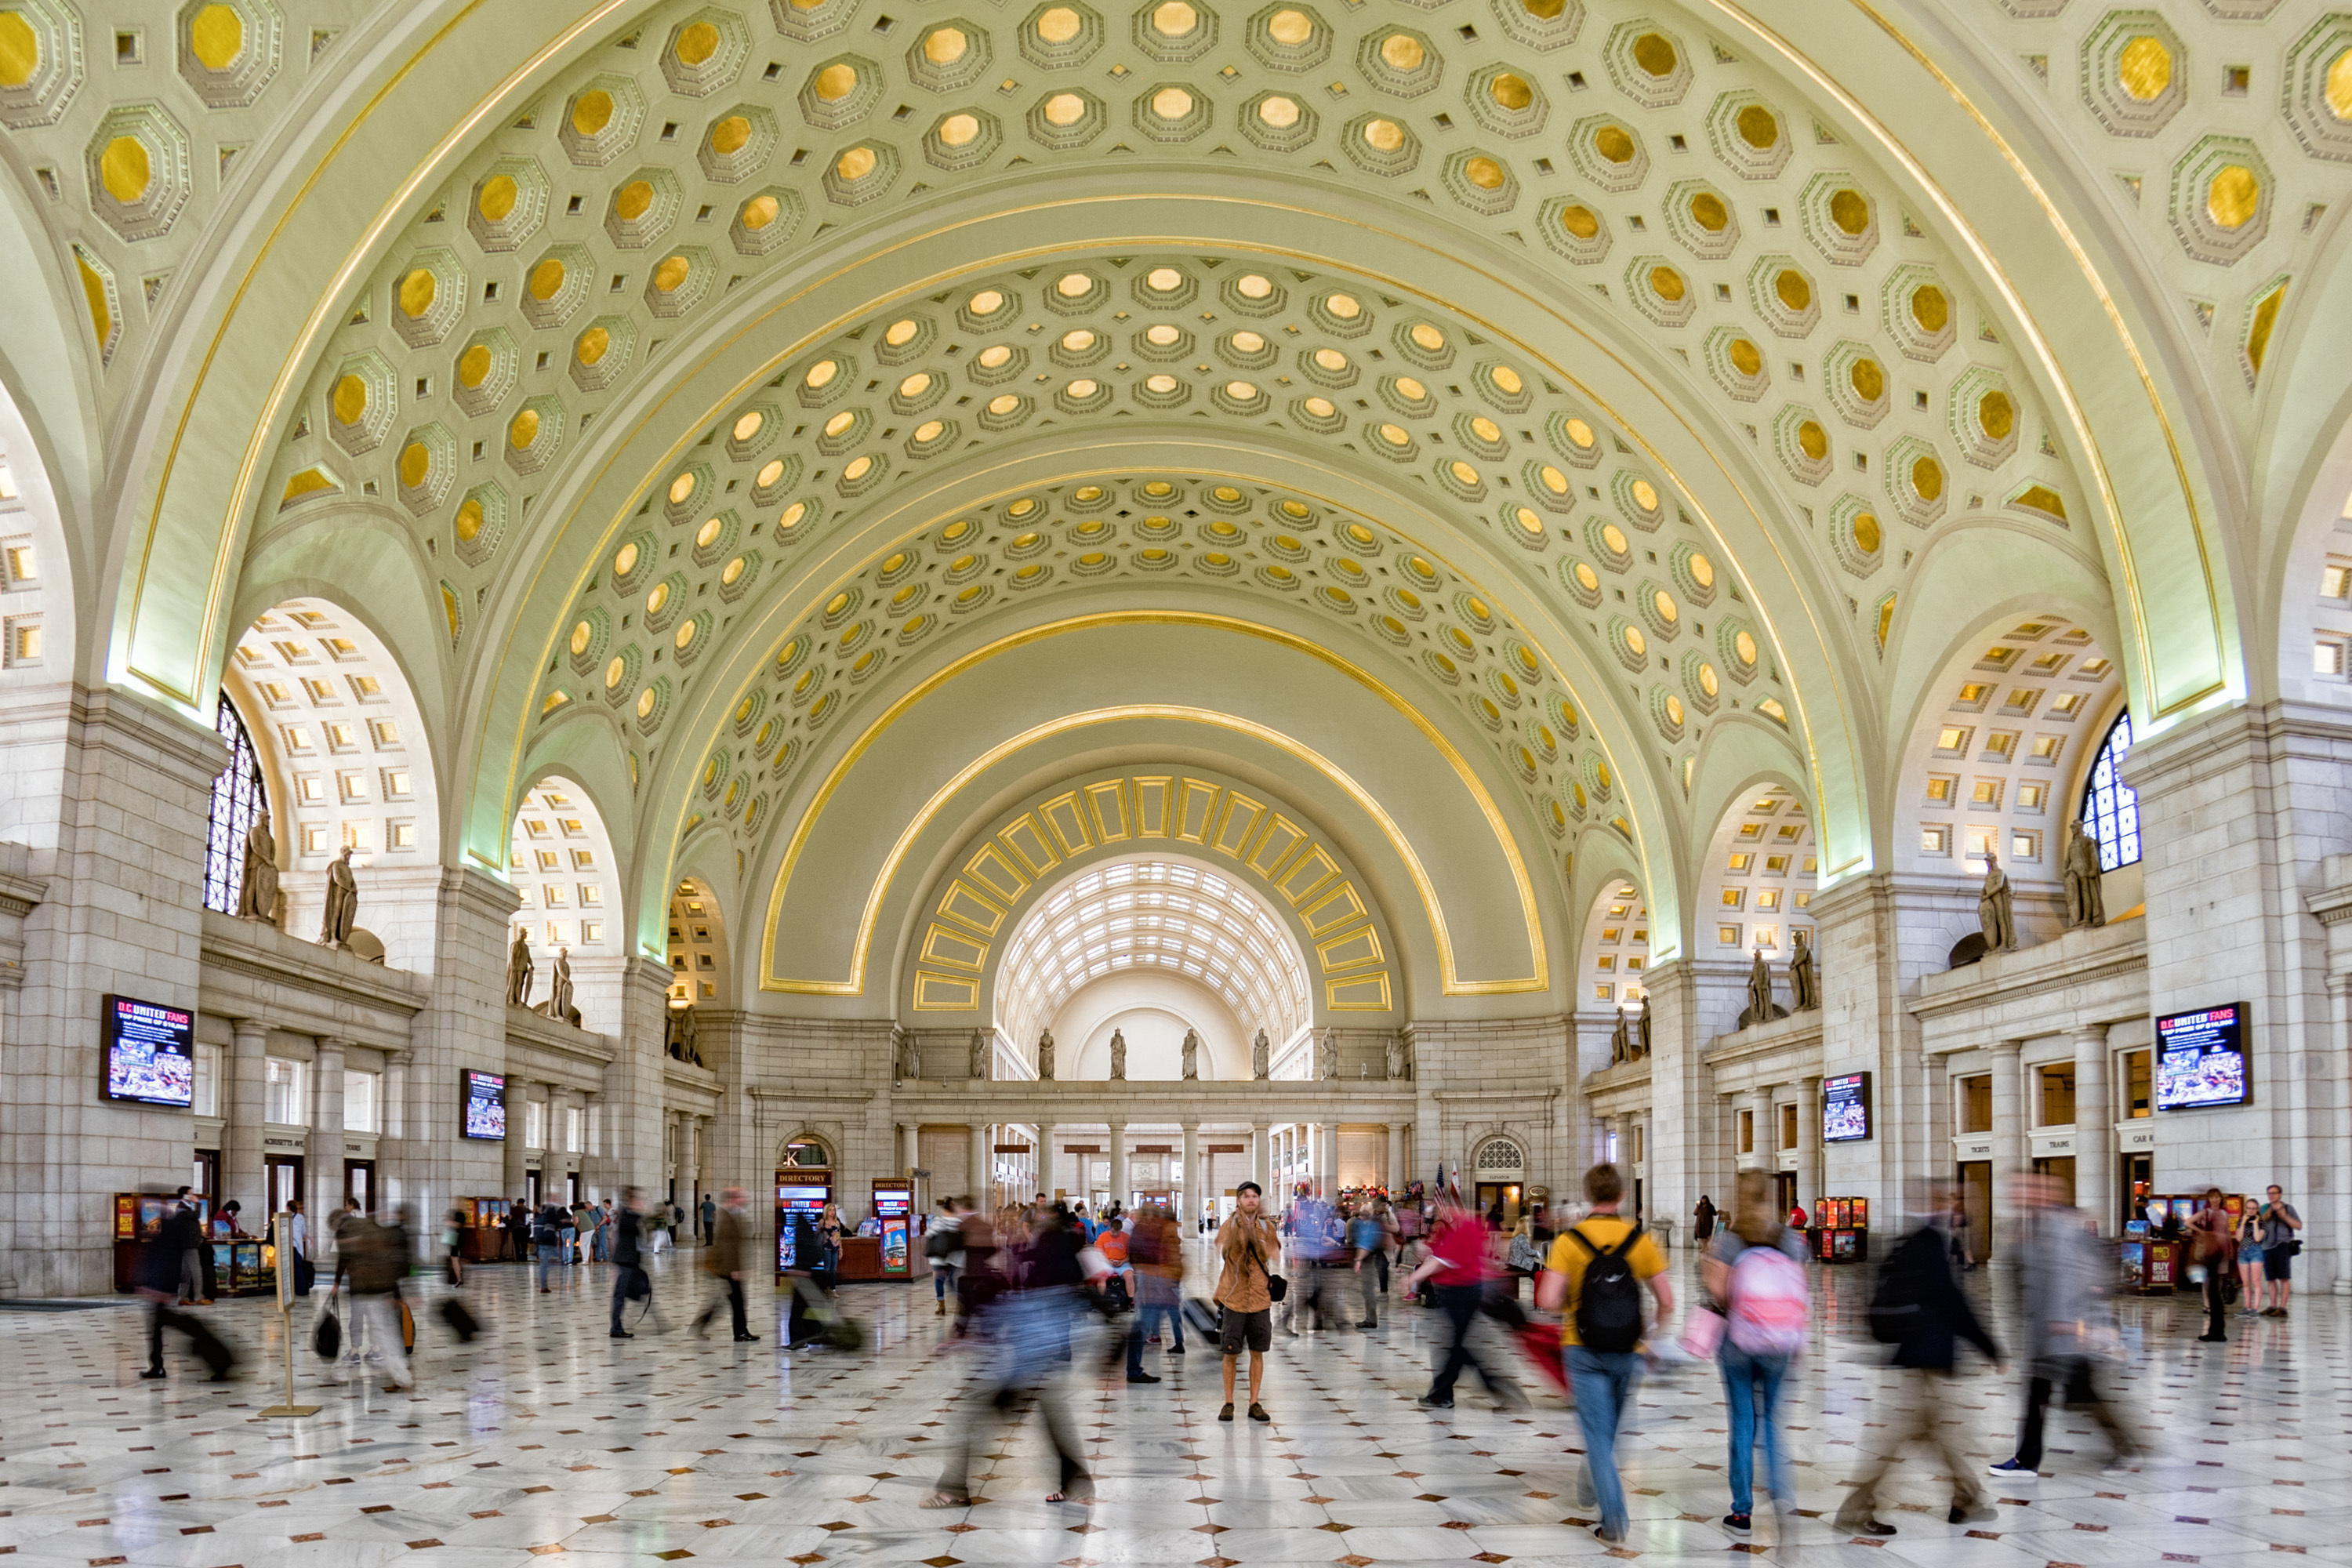 Slide 3 of 29: WASHINGTON, USA - APRIL 27 2017 - washington union station internal view. Train station renewed is one of the most traffic train station in Maryland; Shutterstock ID 687179239; Purchase Order: -